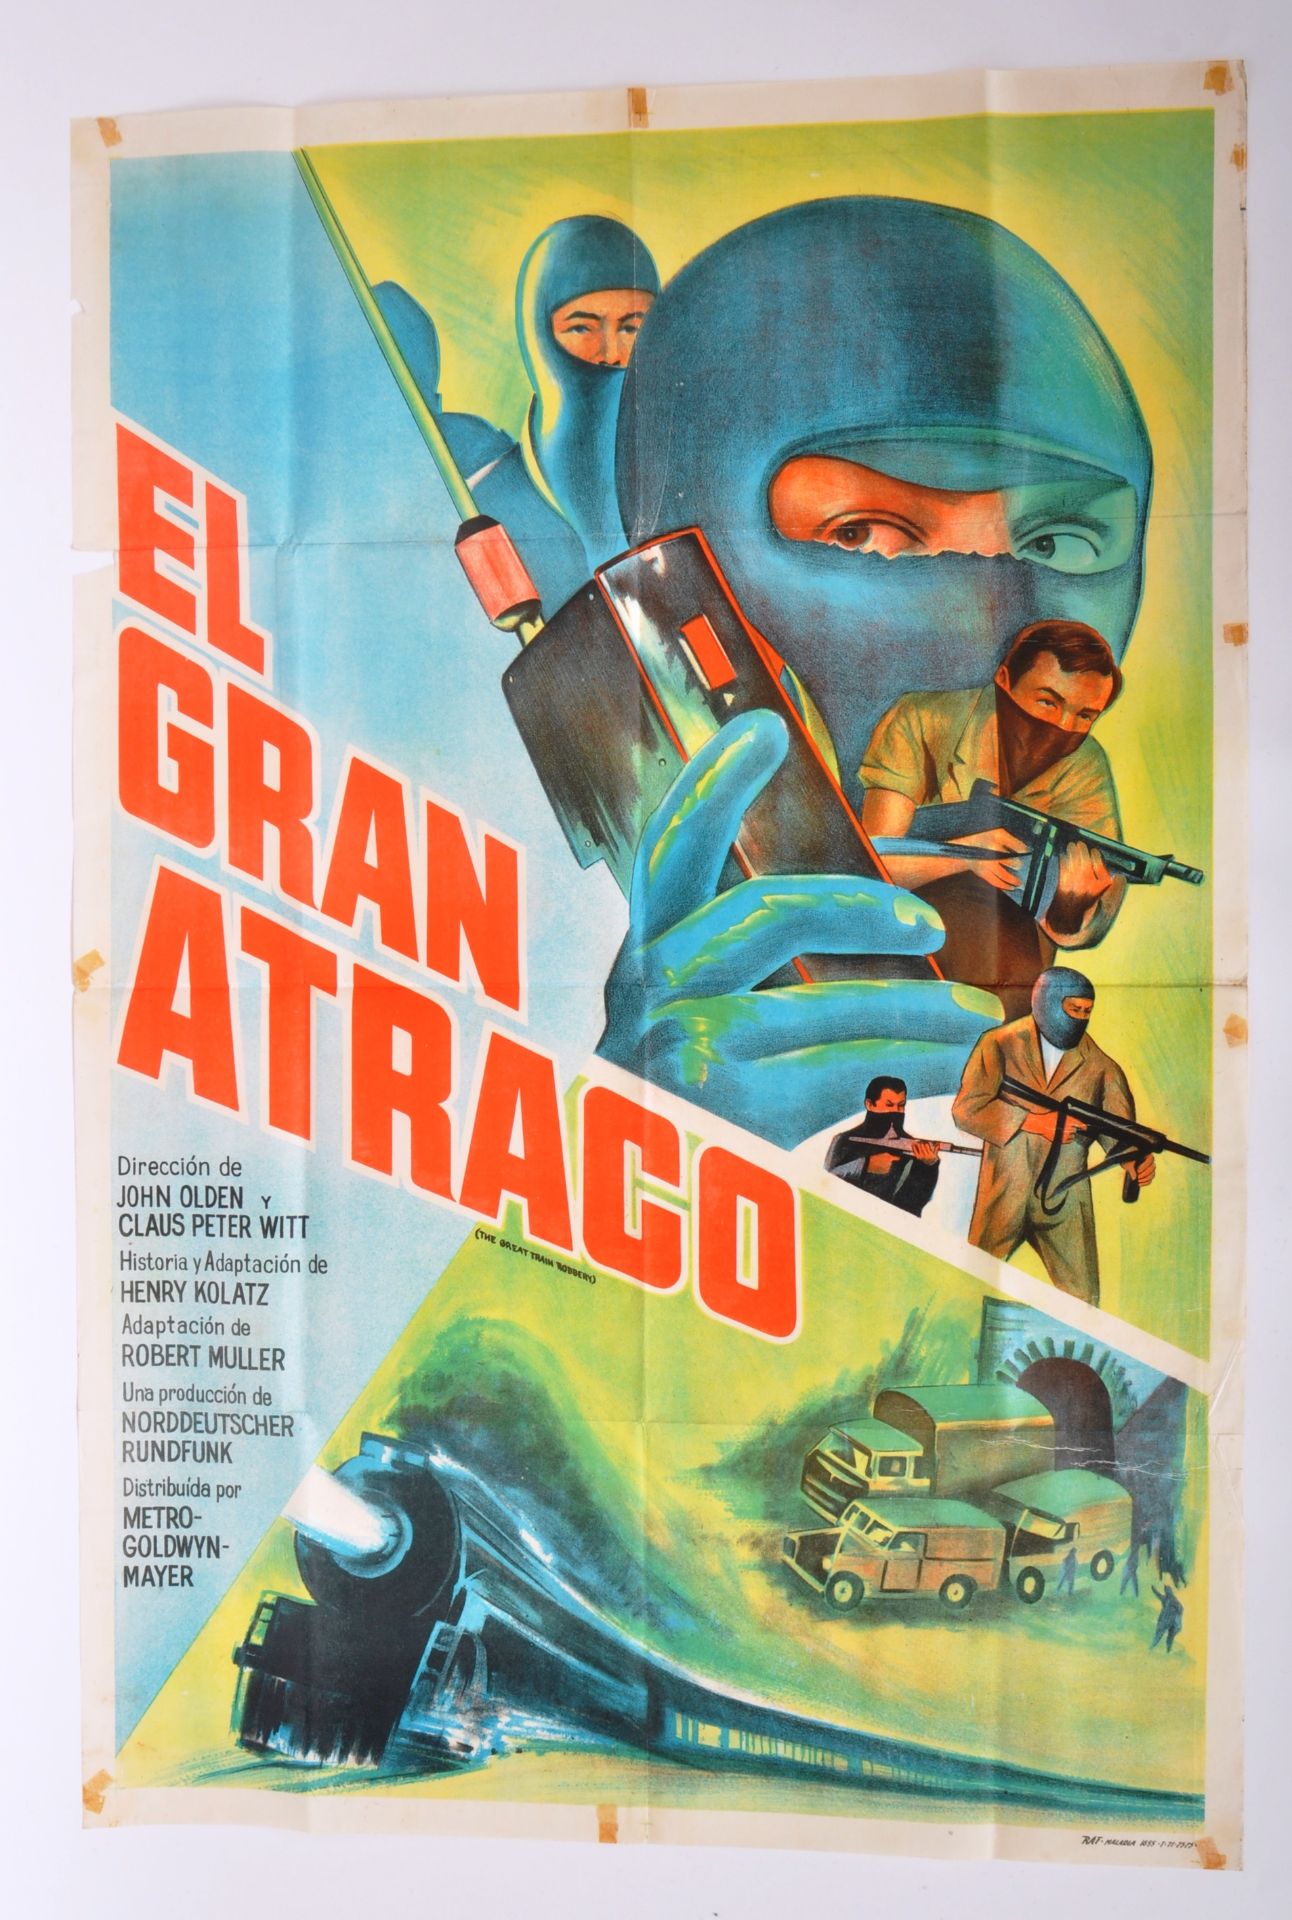 A VINTAGE CINEMA FILM POSTER “THE GREAT TRAIN ROBBERY” - Image 2 of 5